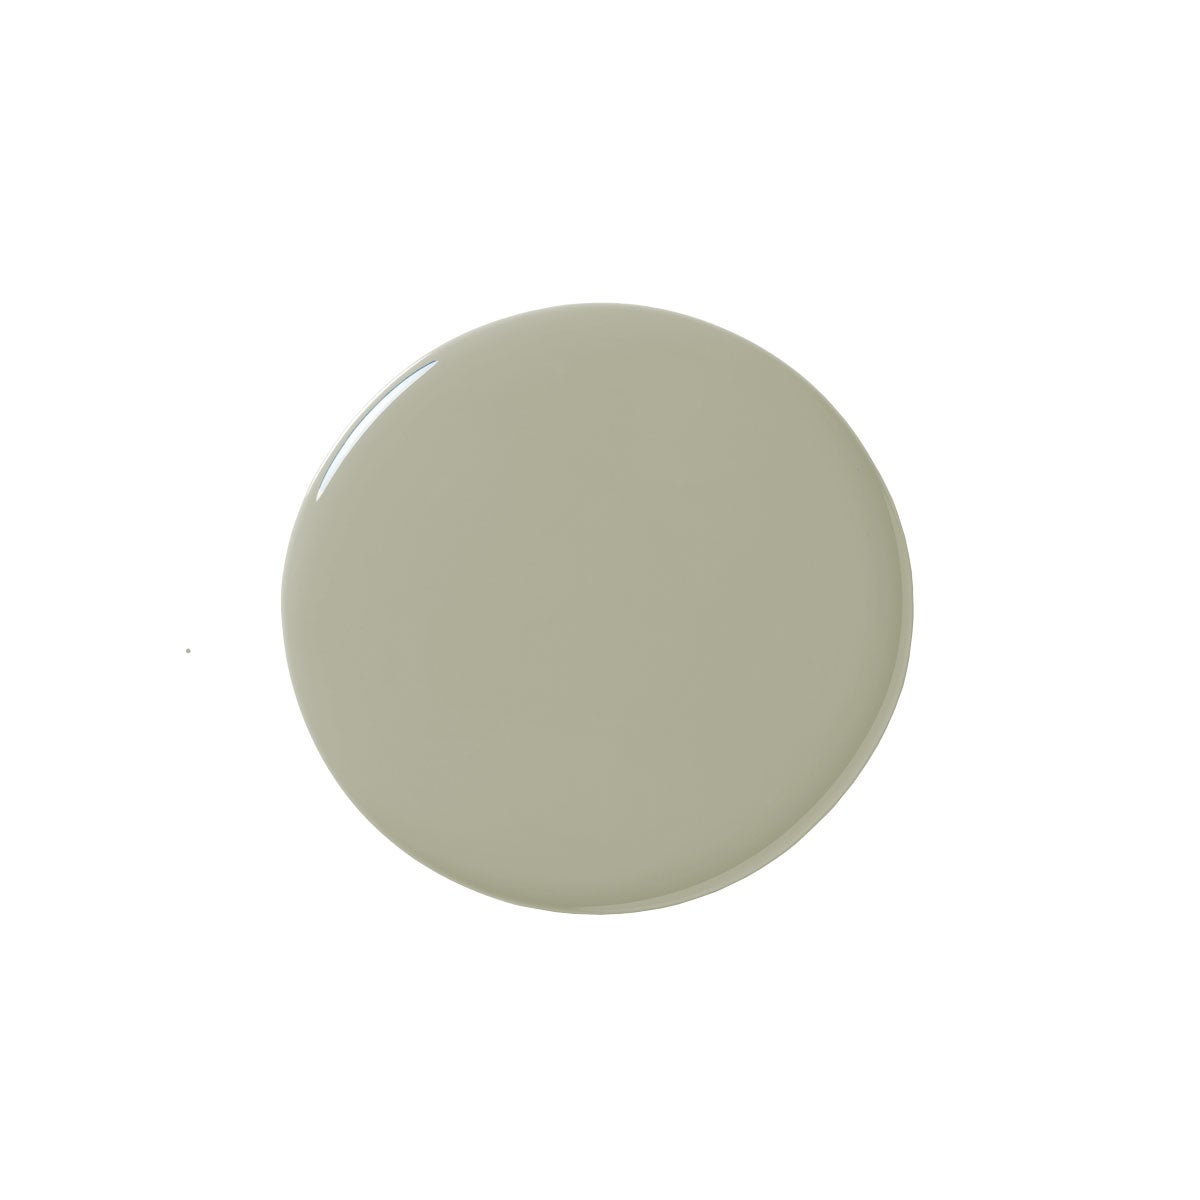 Clary Sage by Sherwin-Williams